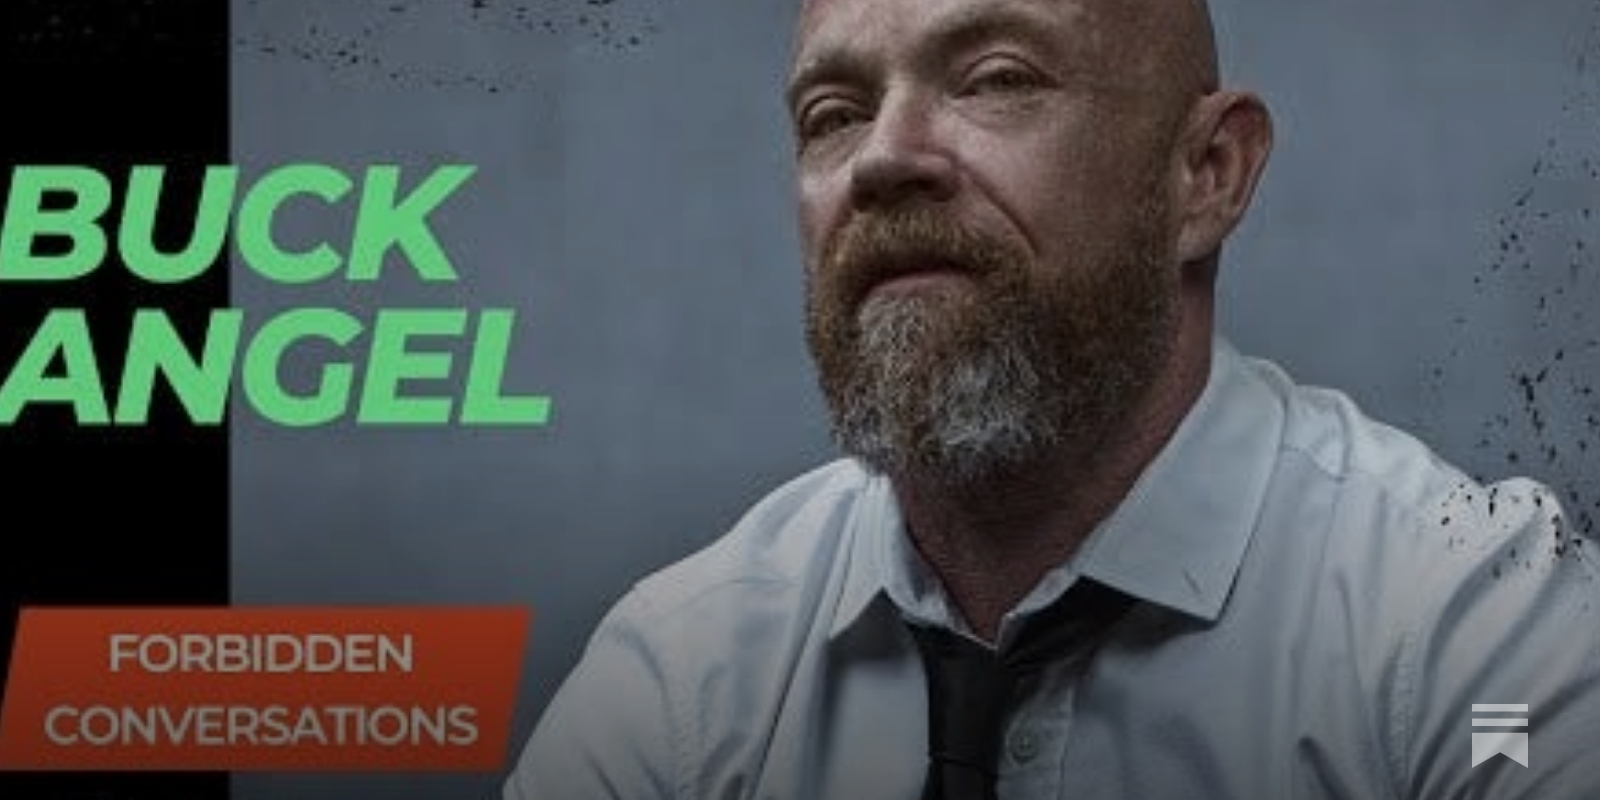 chase jerome recommends buck angel howard stern pic